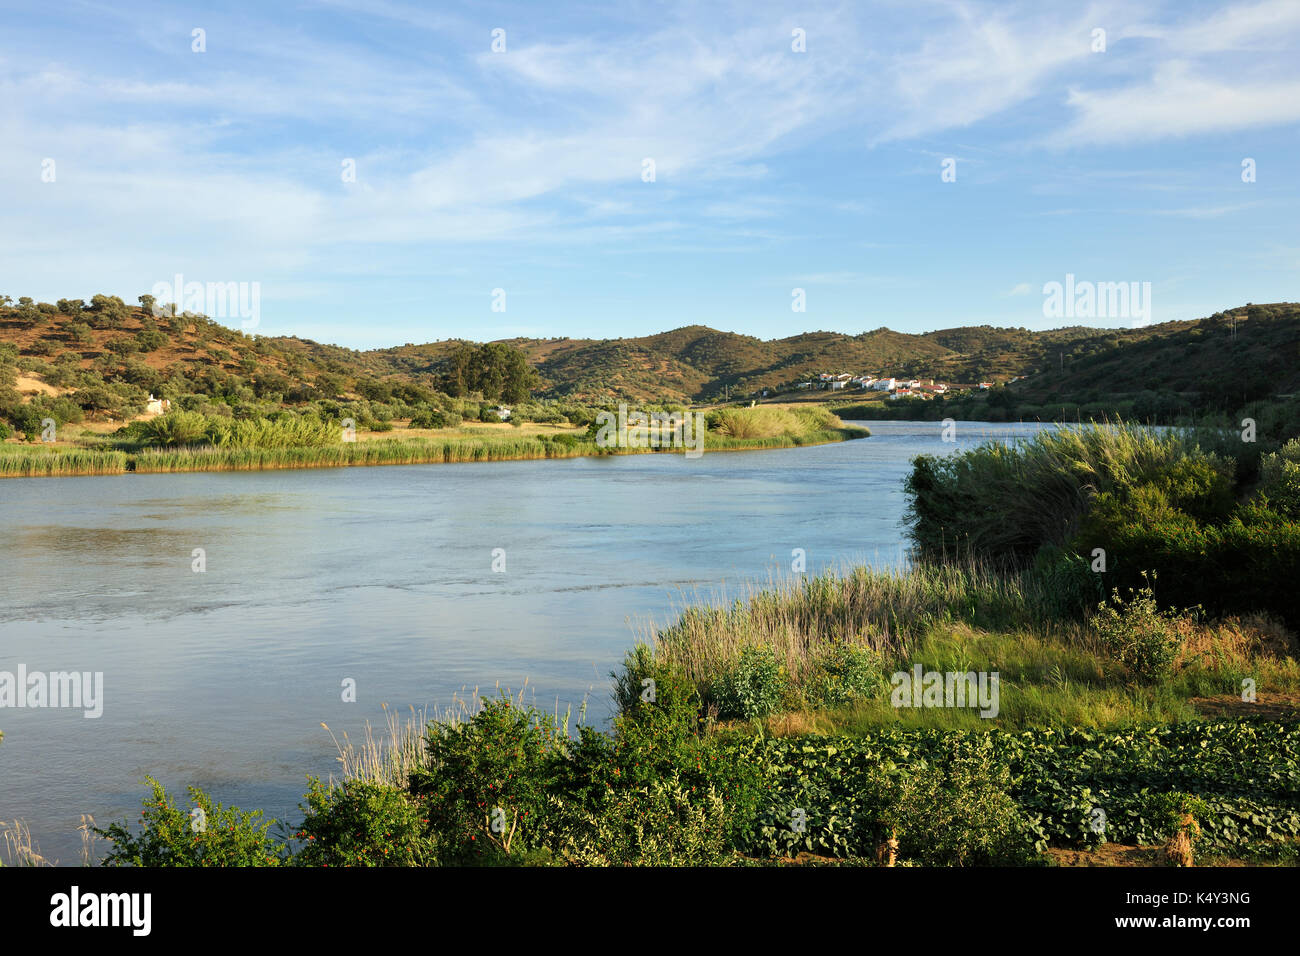 Guadiana river, the borderline between Portugal and Spain. Algarve, Portugal Stock Photo